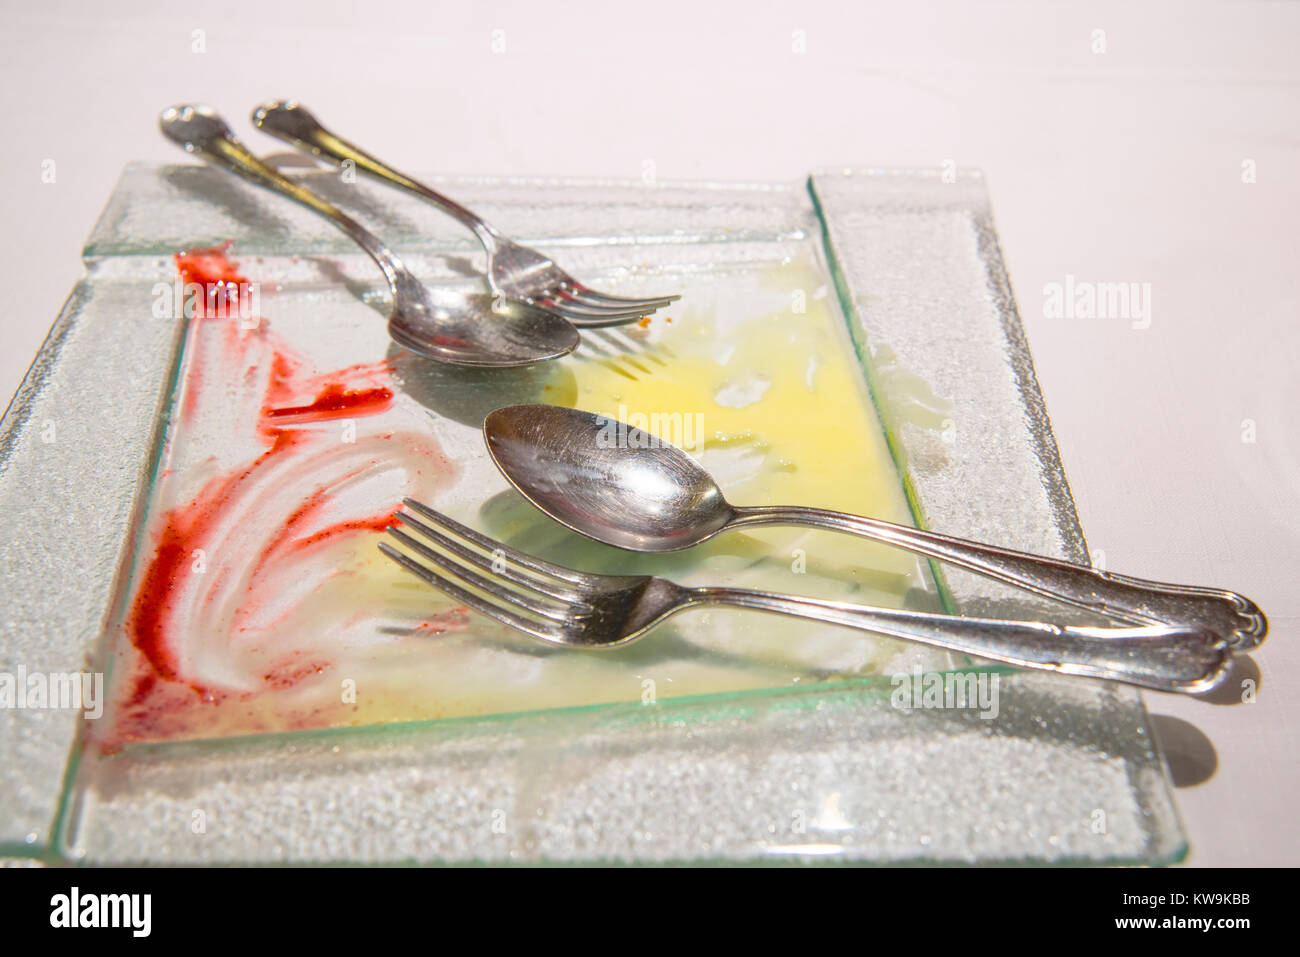 After eating dessert: empty dish with forks and spoons. Stock Photo